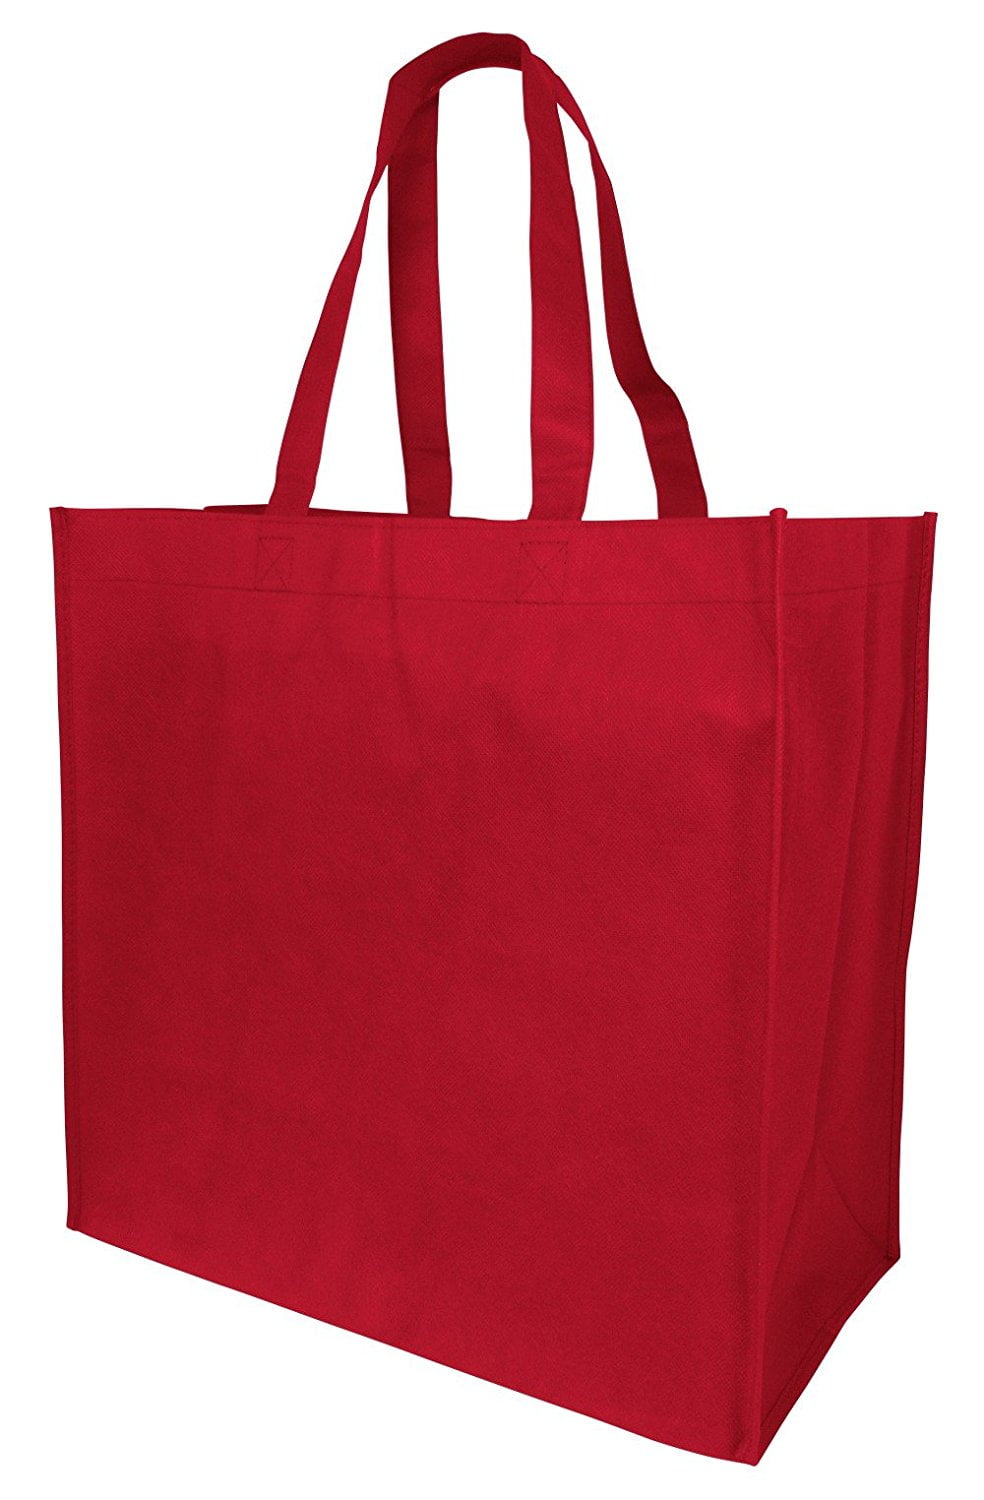 TBF - Reusable Grocery Bags Reinforced Handle Foldable Large Heavy Duty Shopping Totes (25, Red ...